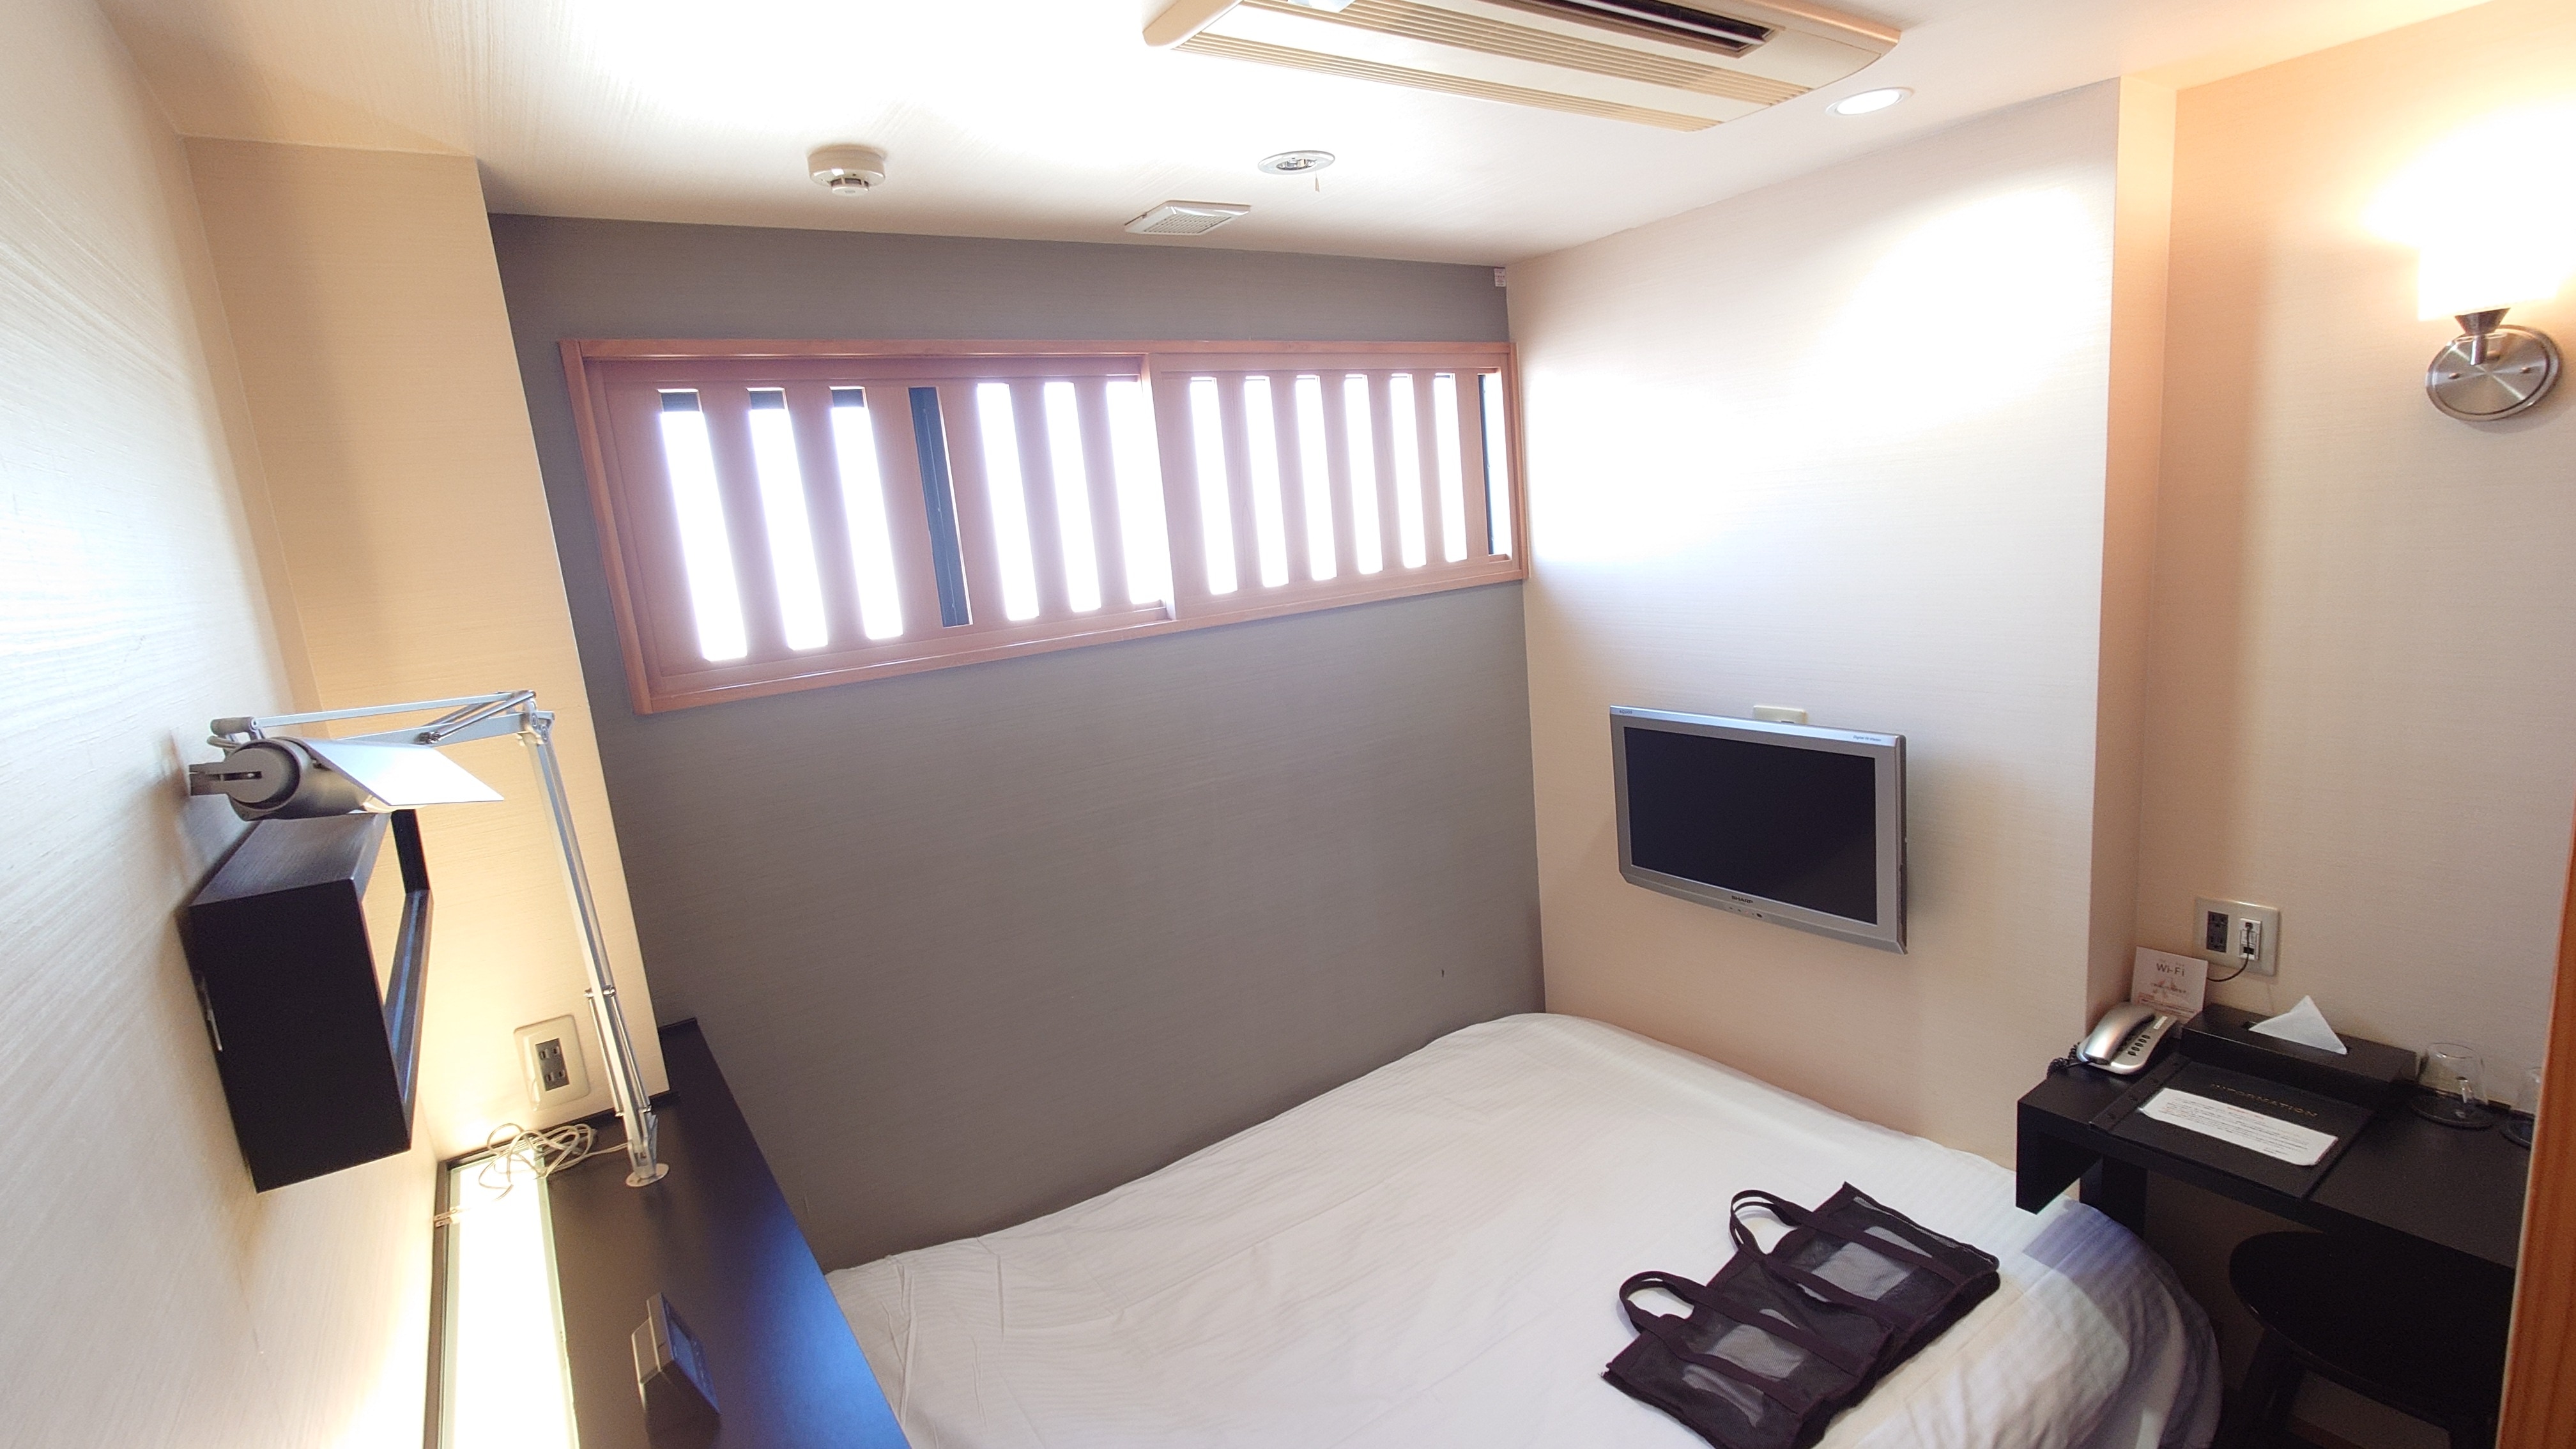 Example of a single room (double bed)